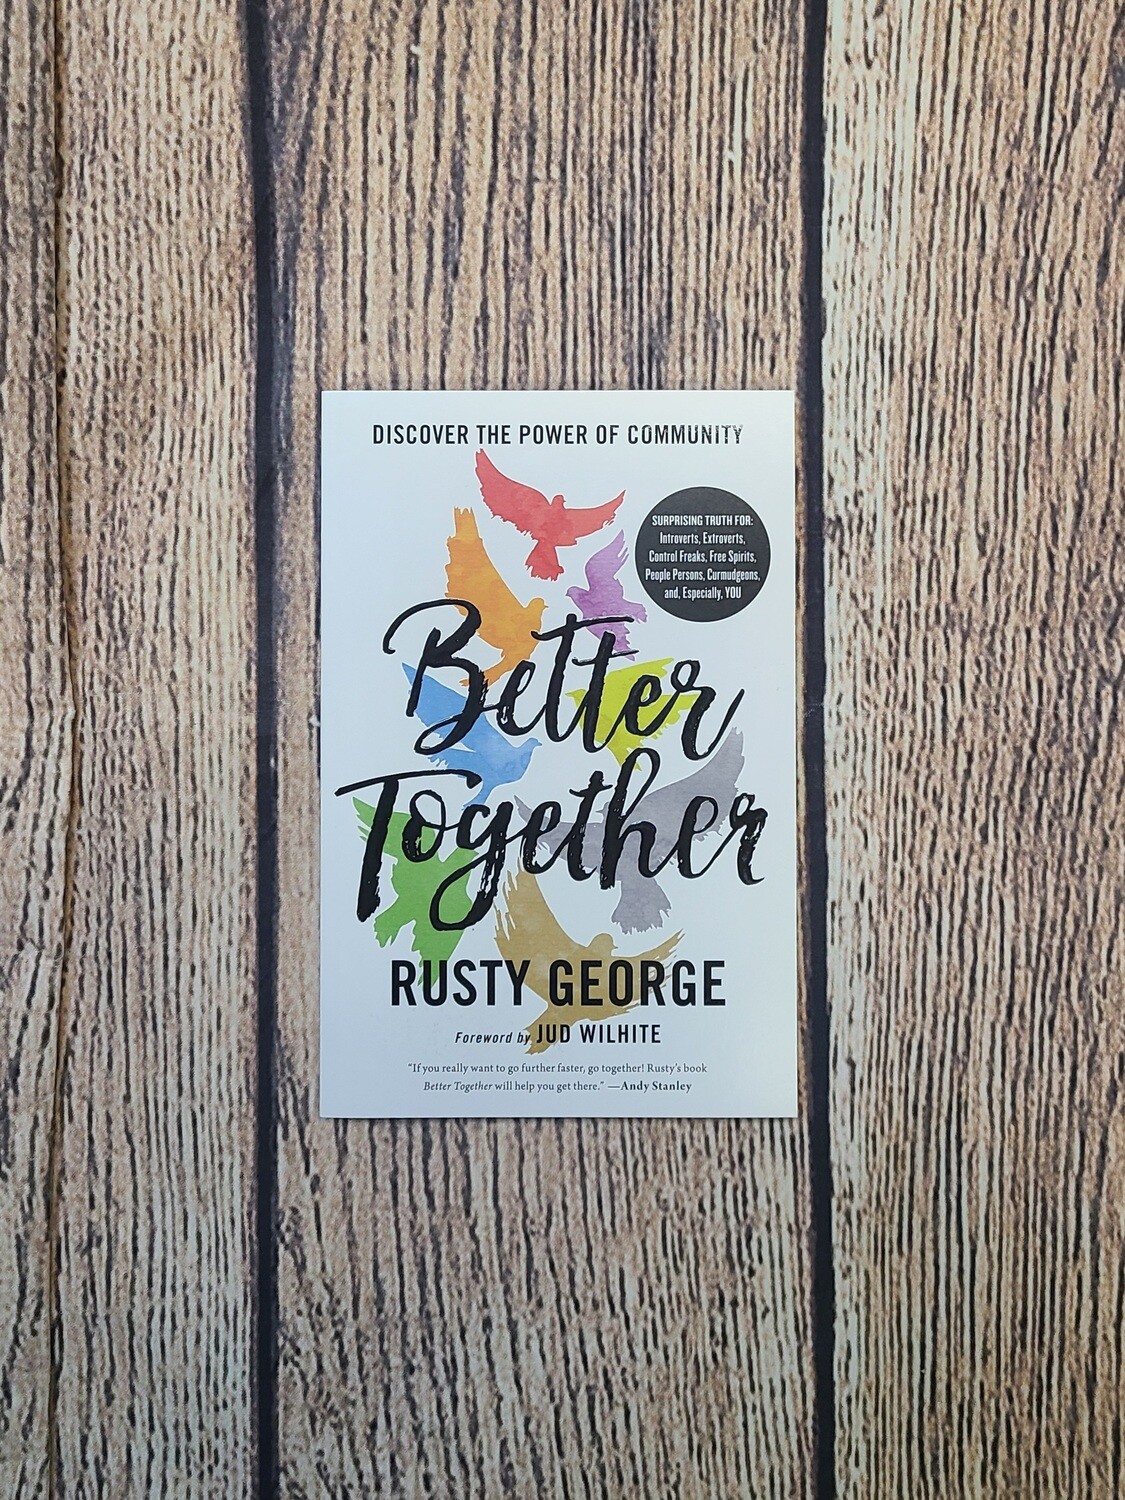 Better Together: Discover the Power of Community by Rusty George